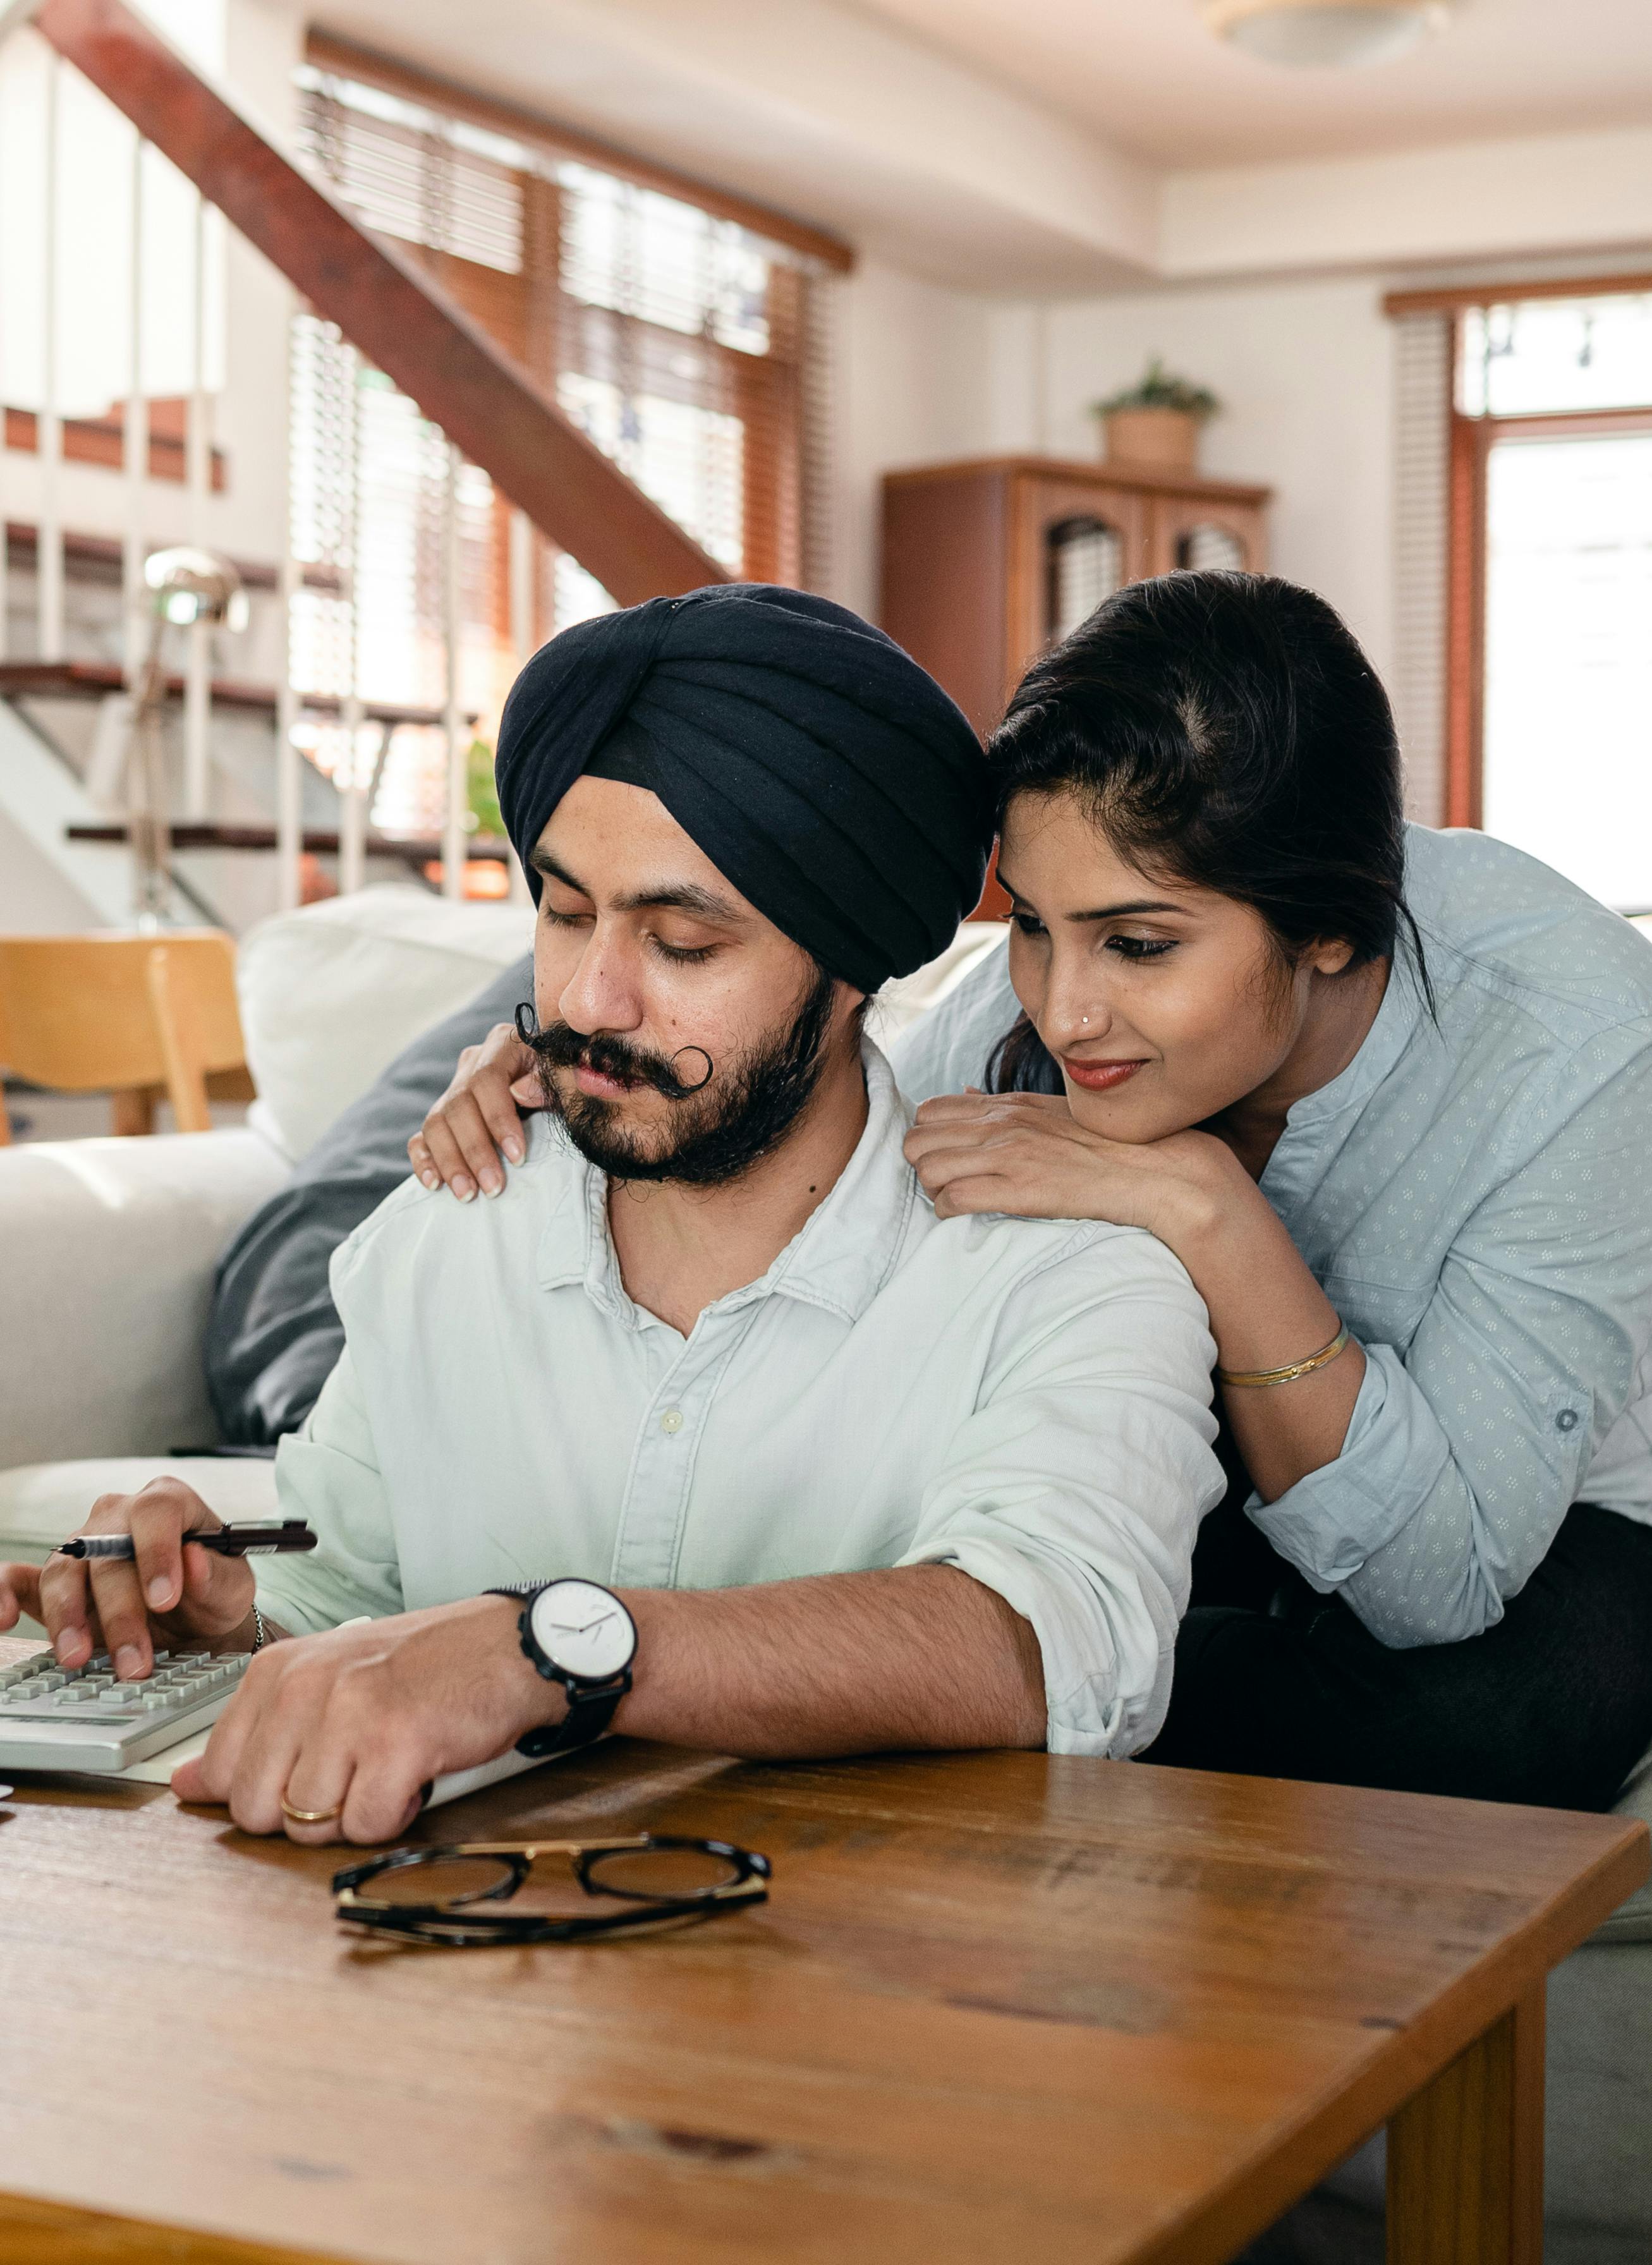 focused young indian couple working at home using calculator